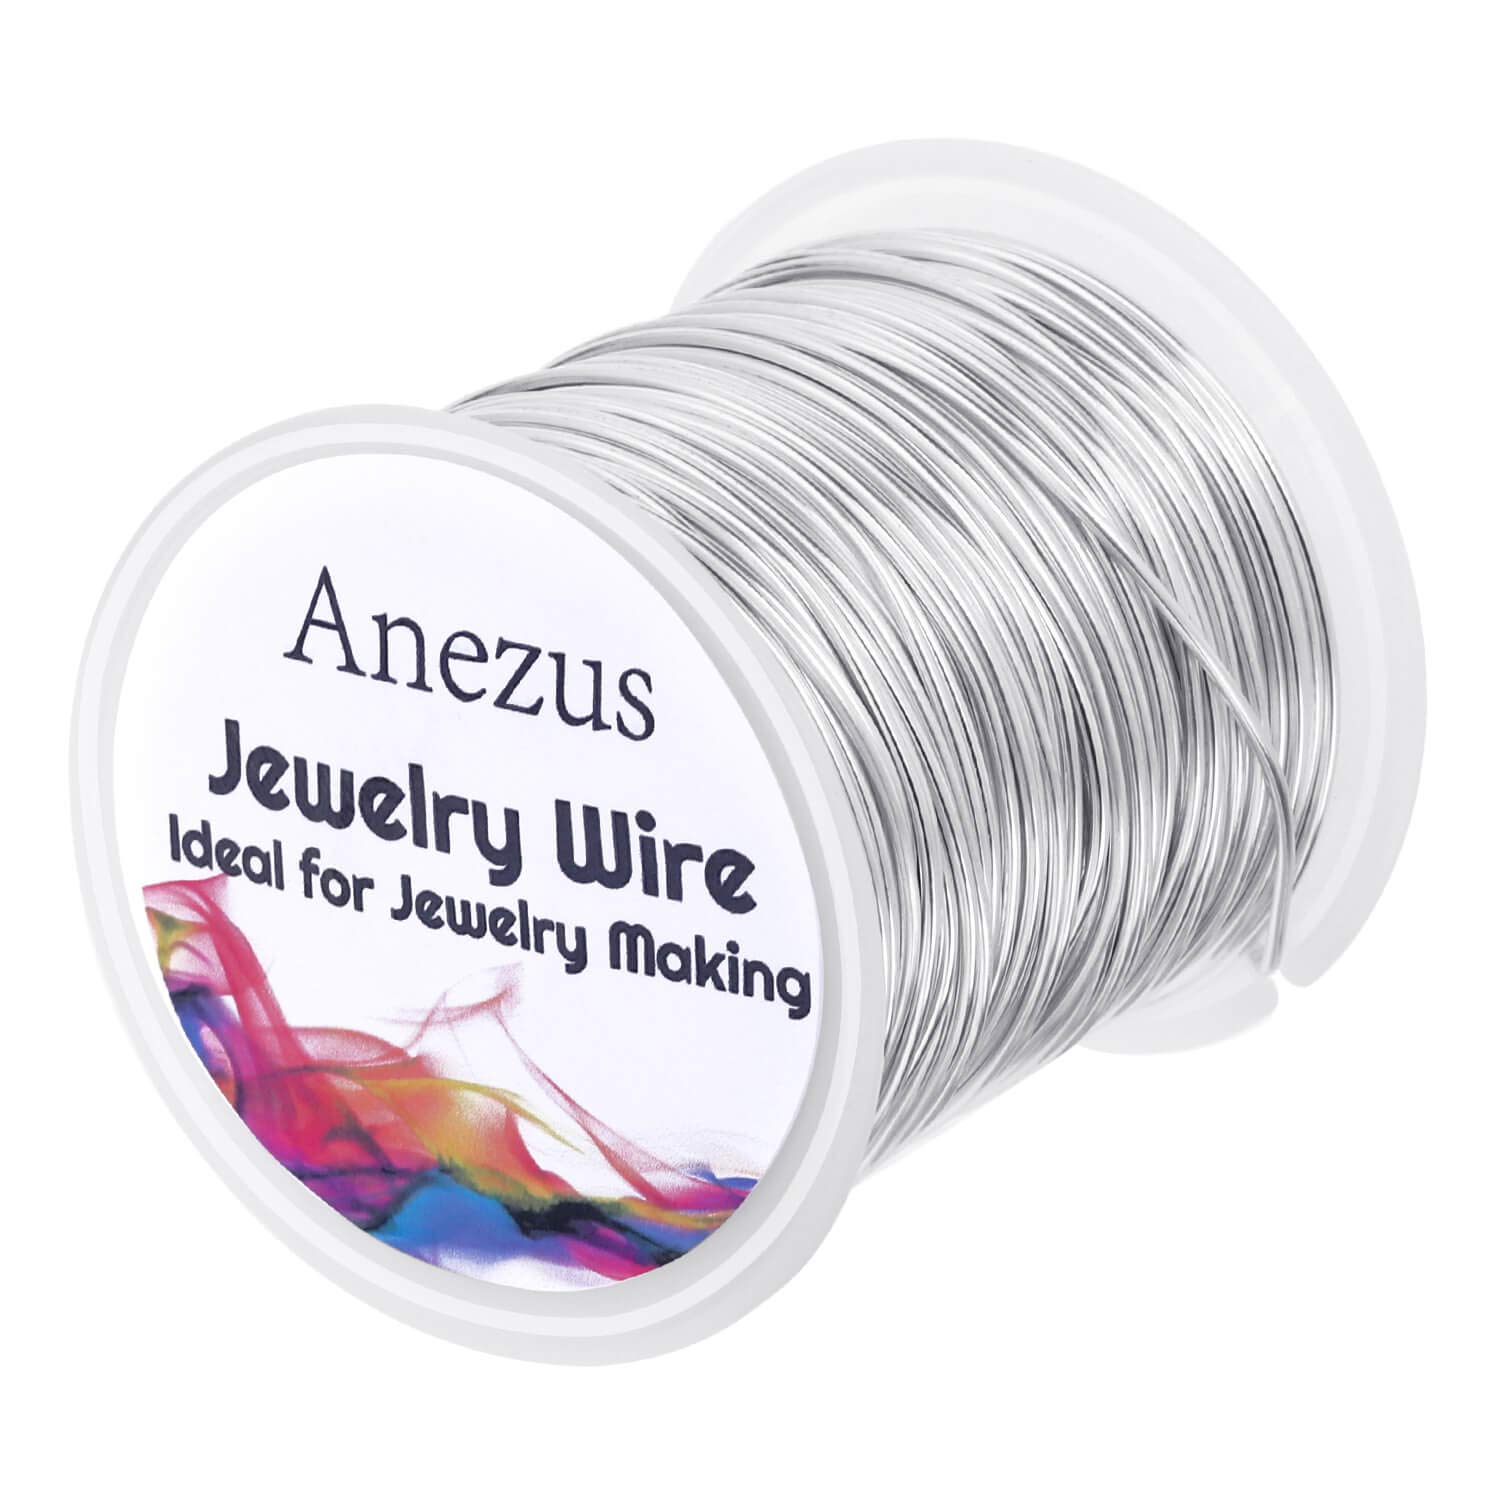 Anezus 18 Gauge Jewelry Wire for Jewelry Making, anezus Craft Wire Tarnish  Resistant Copper Beading Wire for Jewelry Making Supplies and Crafting (18  Gauge, Silver) 18 Gauge Silver 1